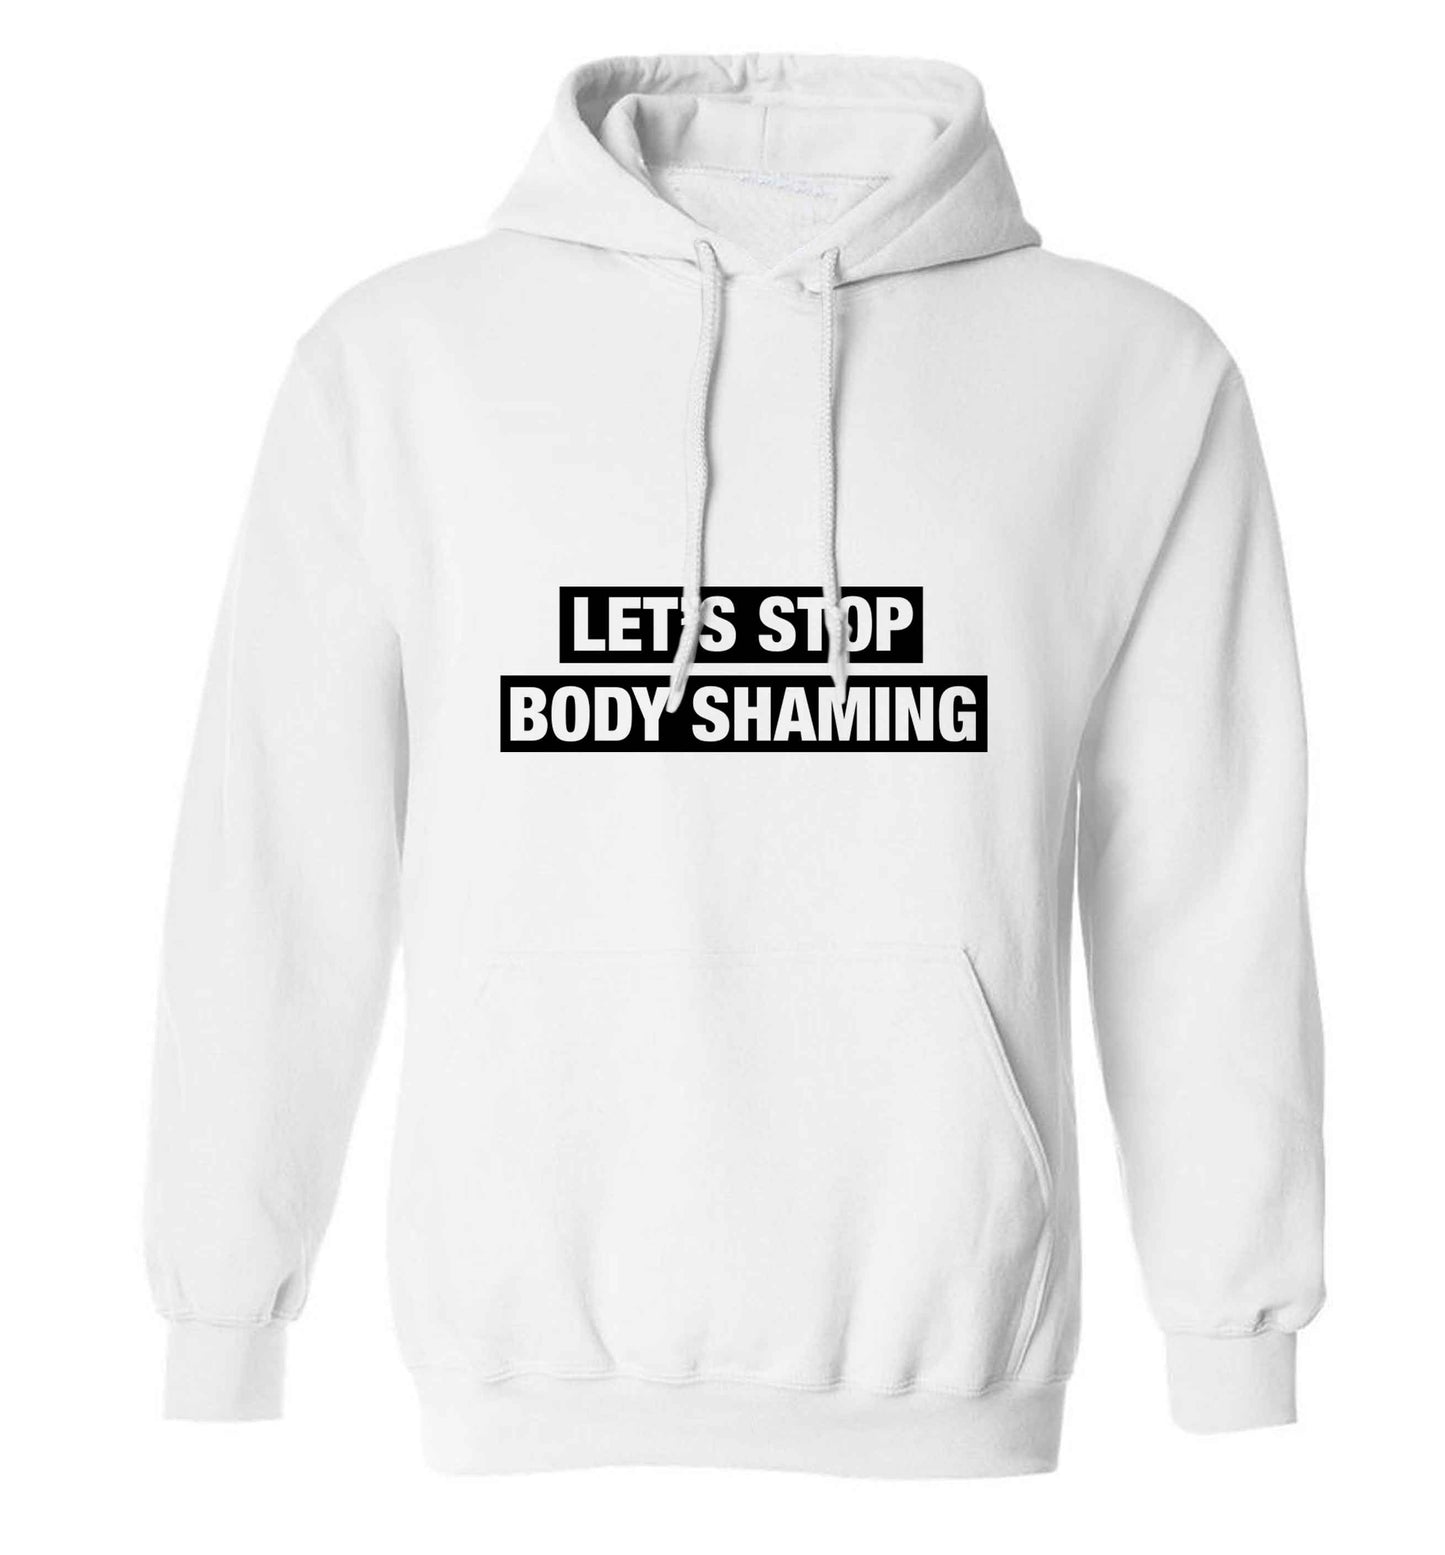 Let's stop body shaming adults unisex white hoodie 2XL